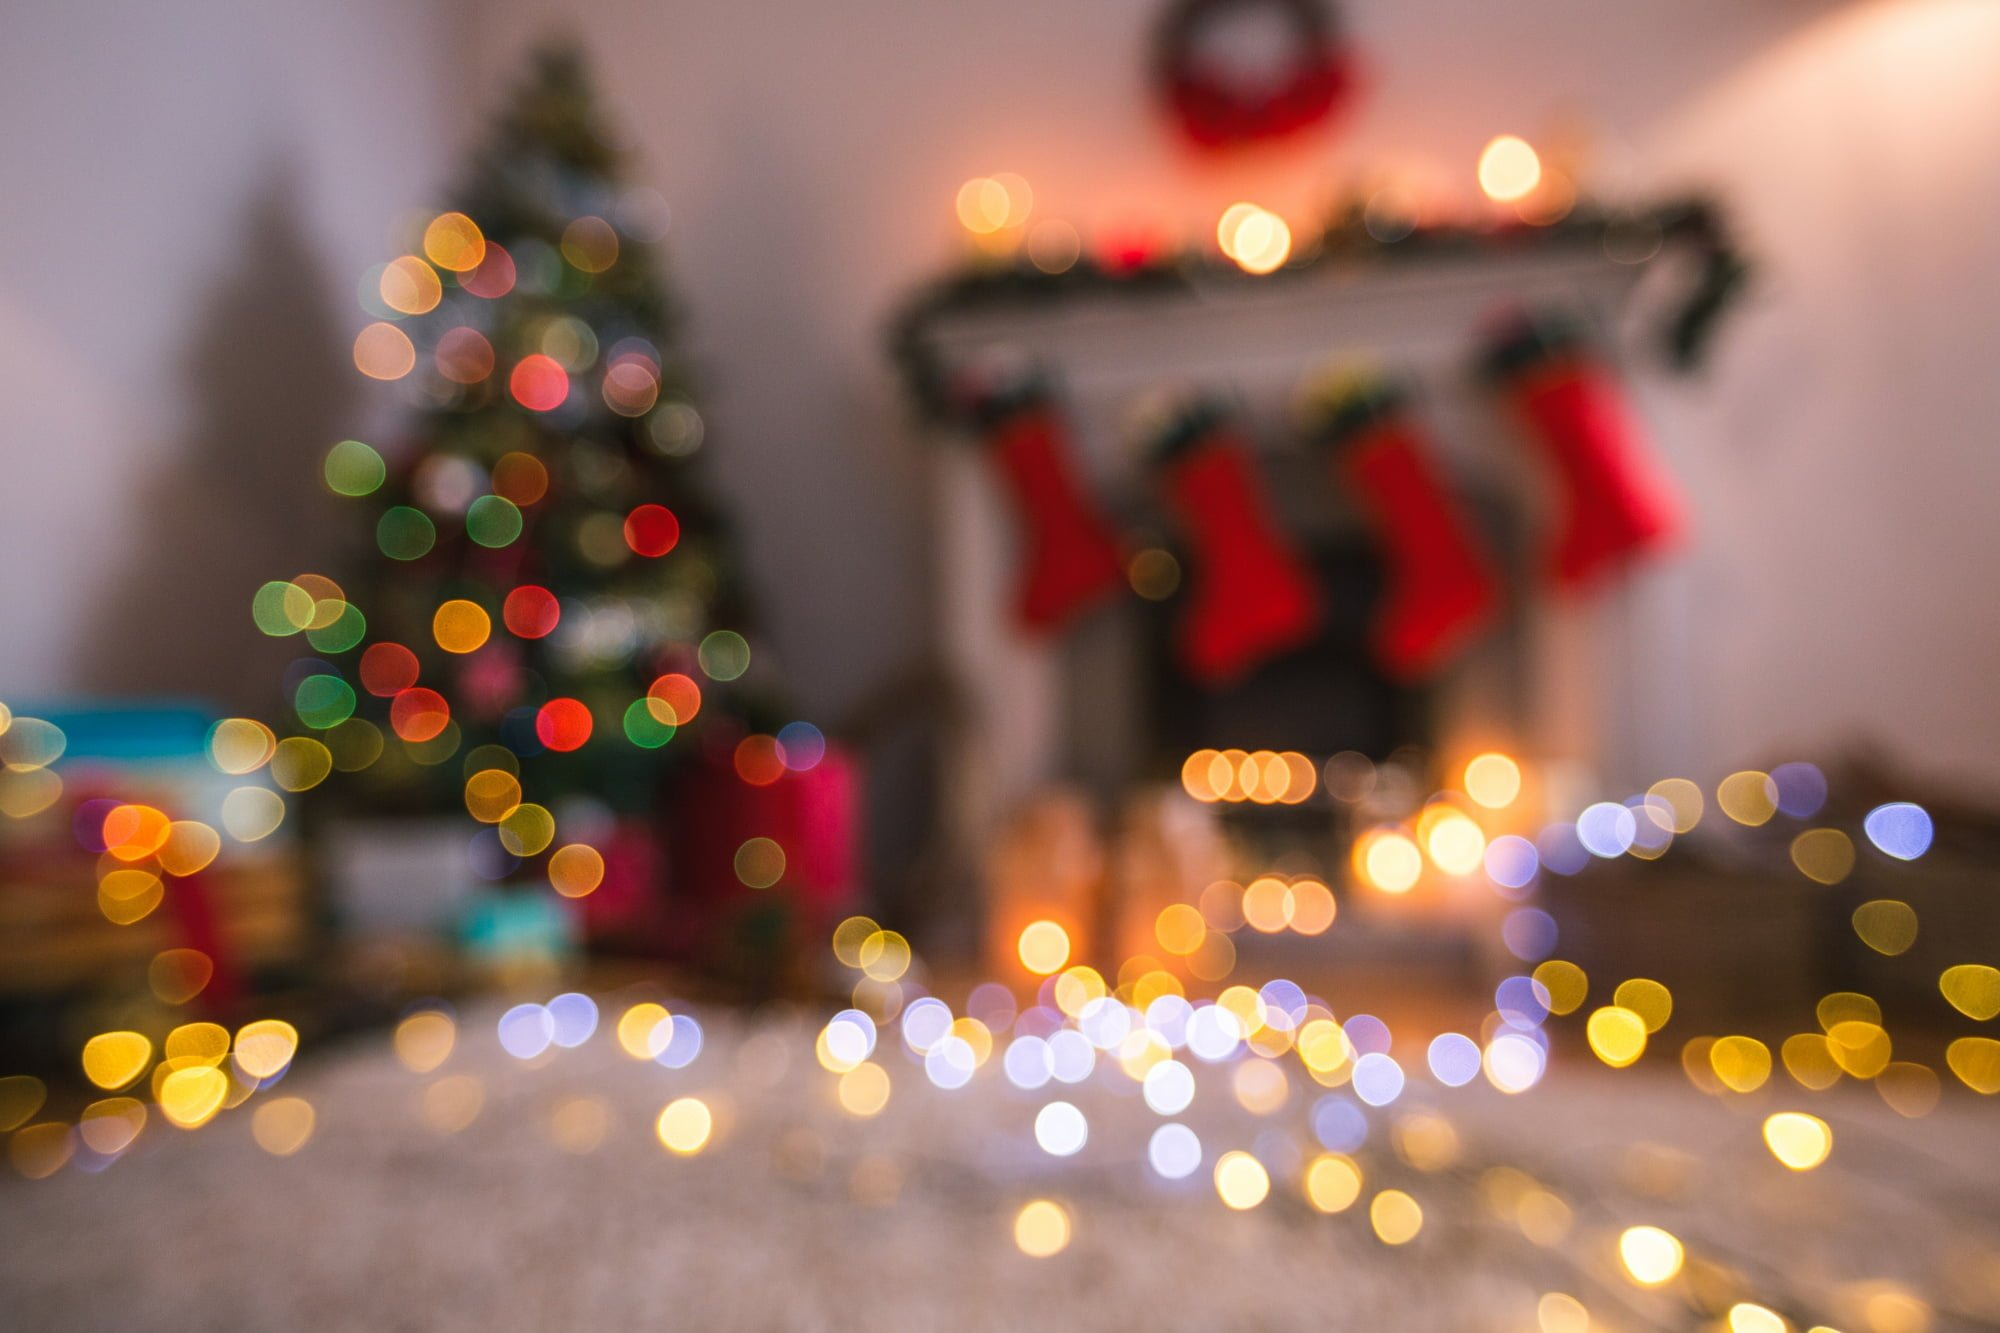 4 Ways to Add Christmas Spirit to Your Home